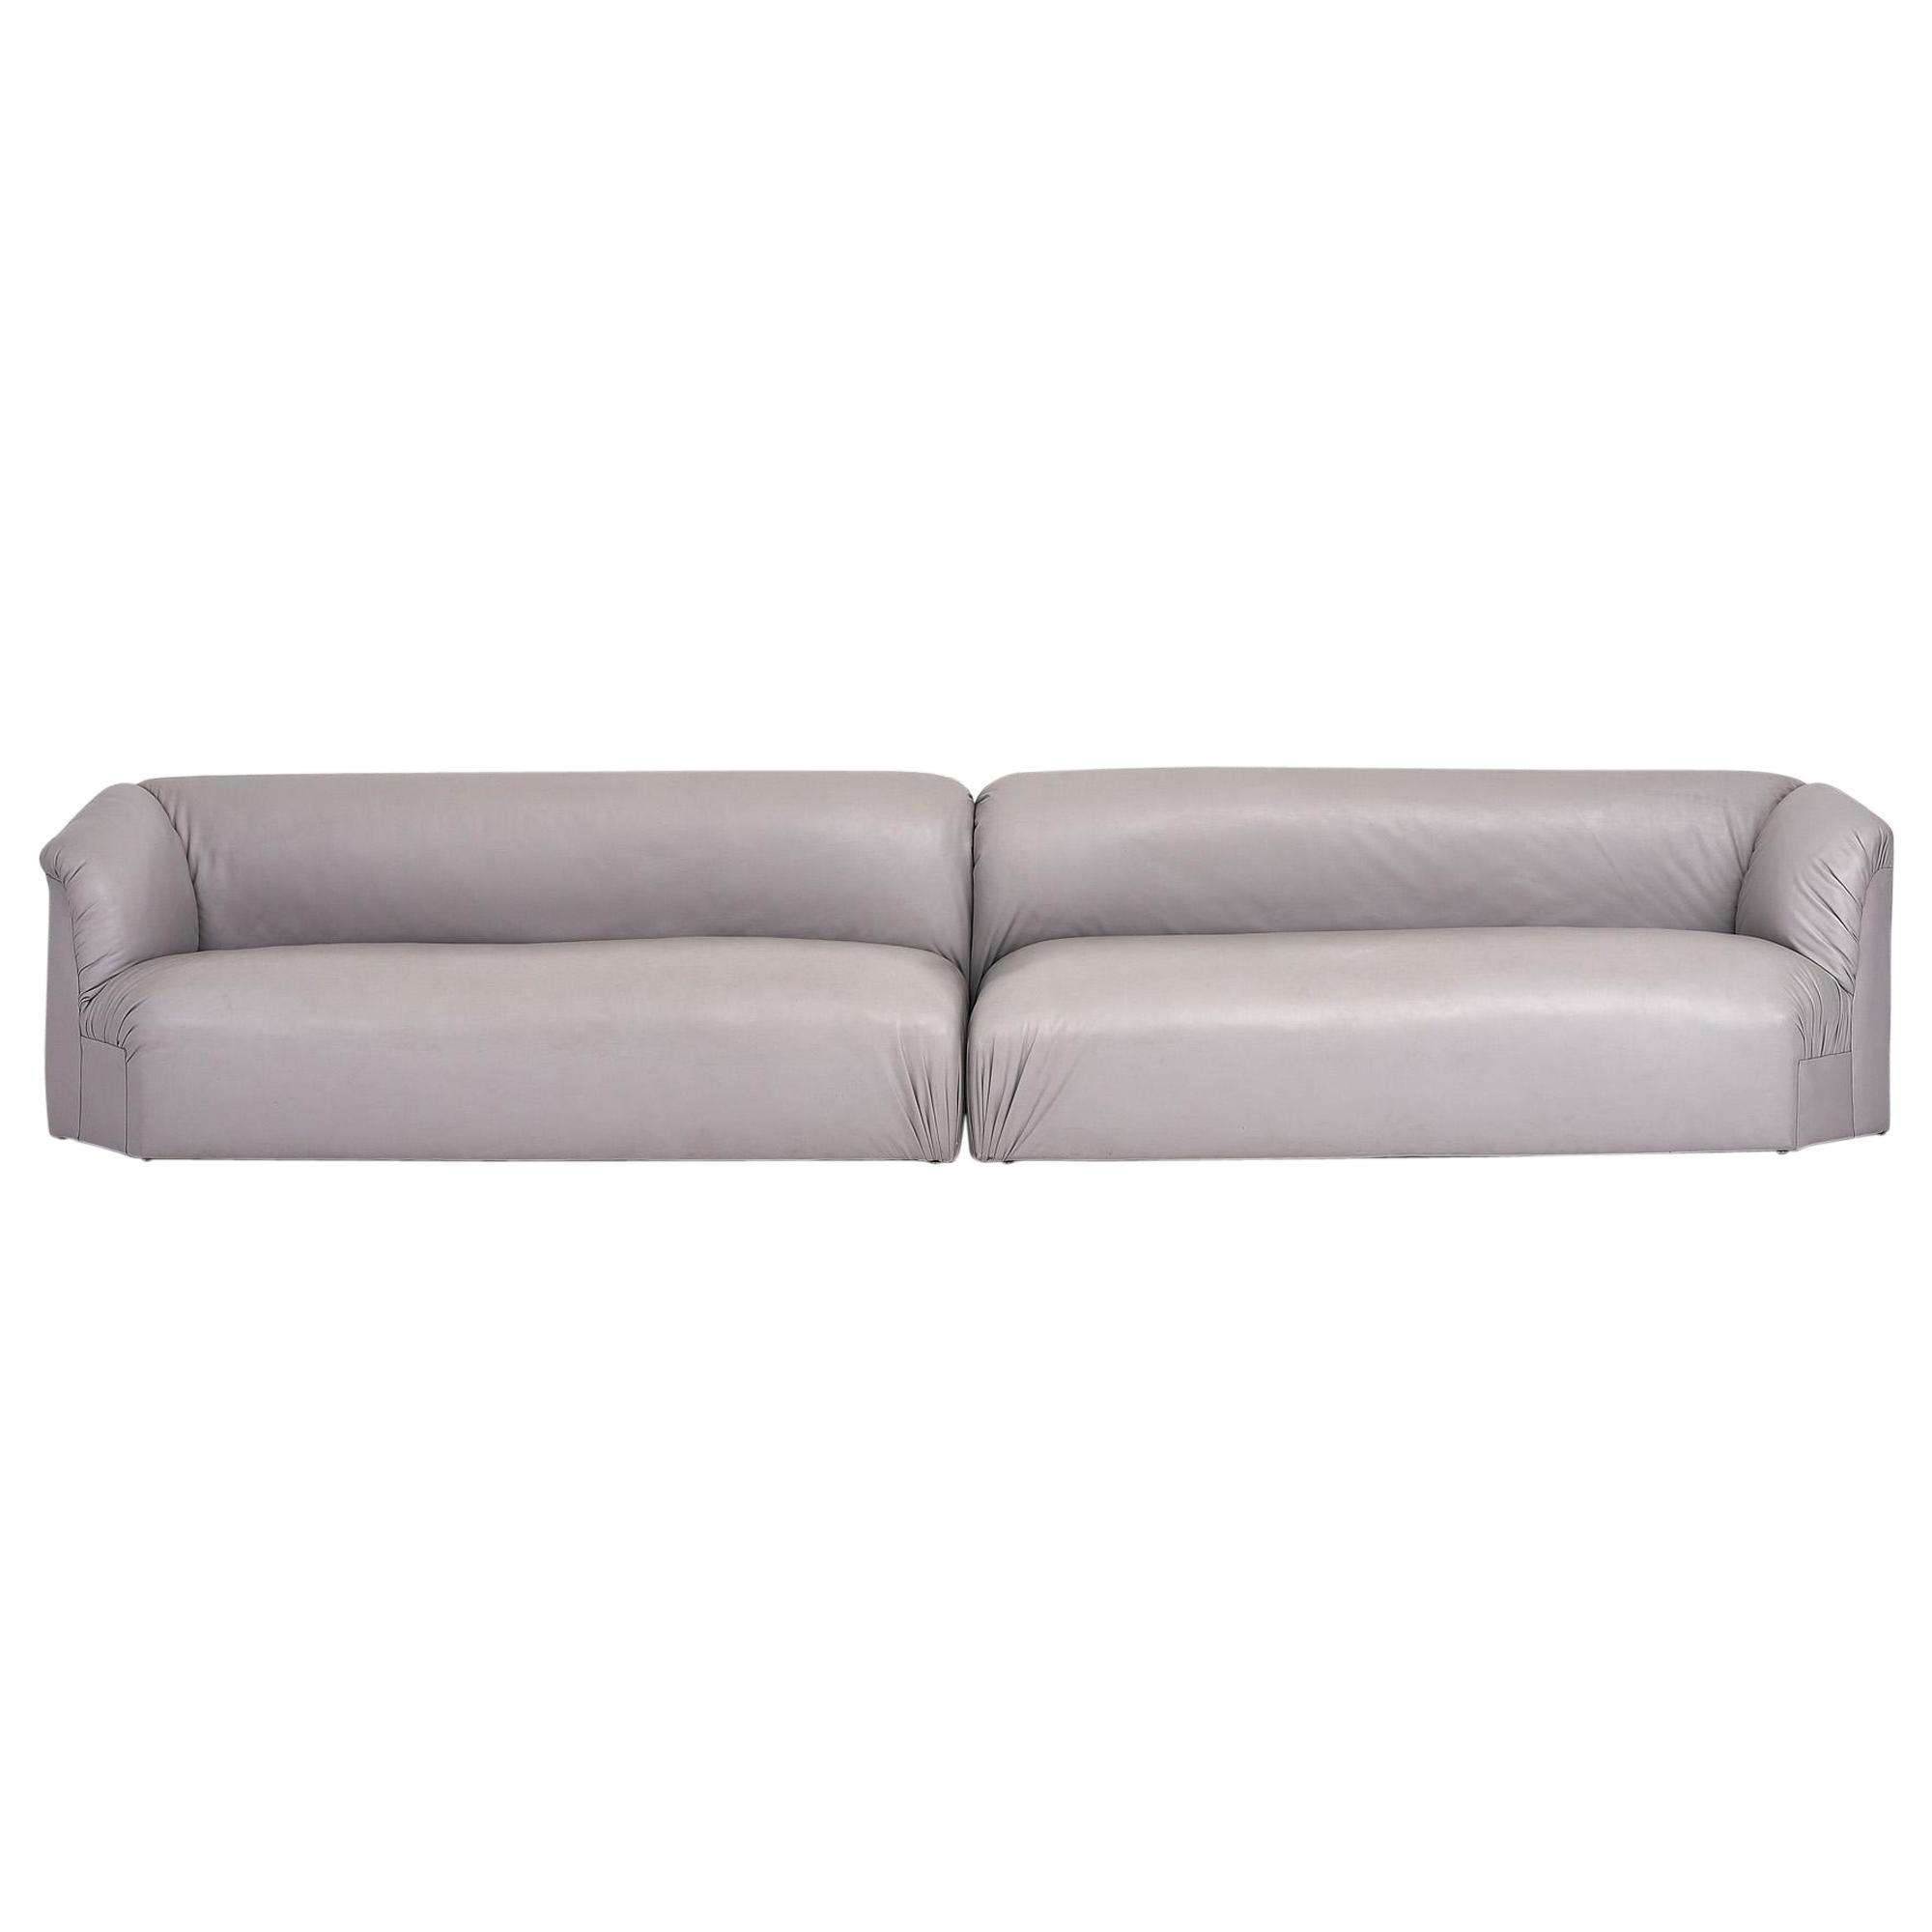 Gray Leather Sectional Sofas, 2 Piece Leather Sectional